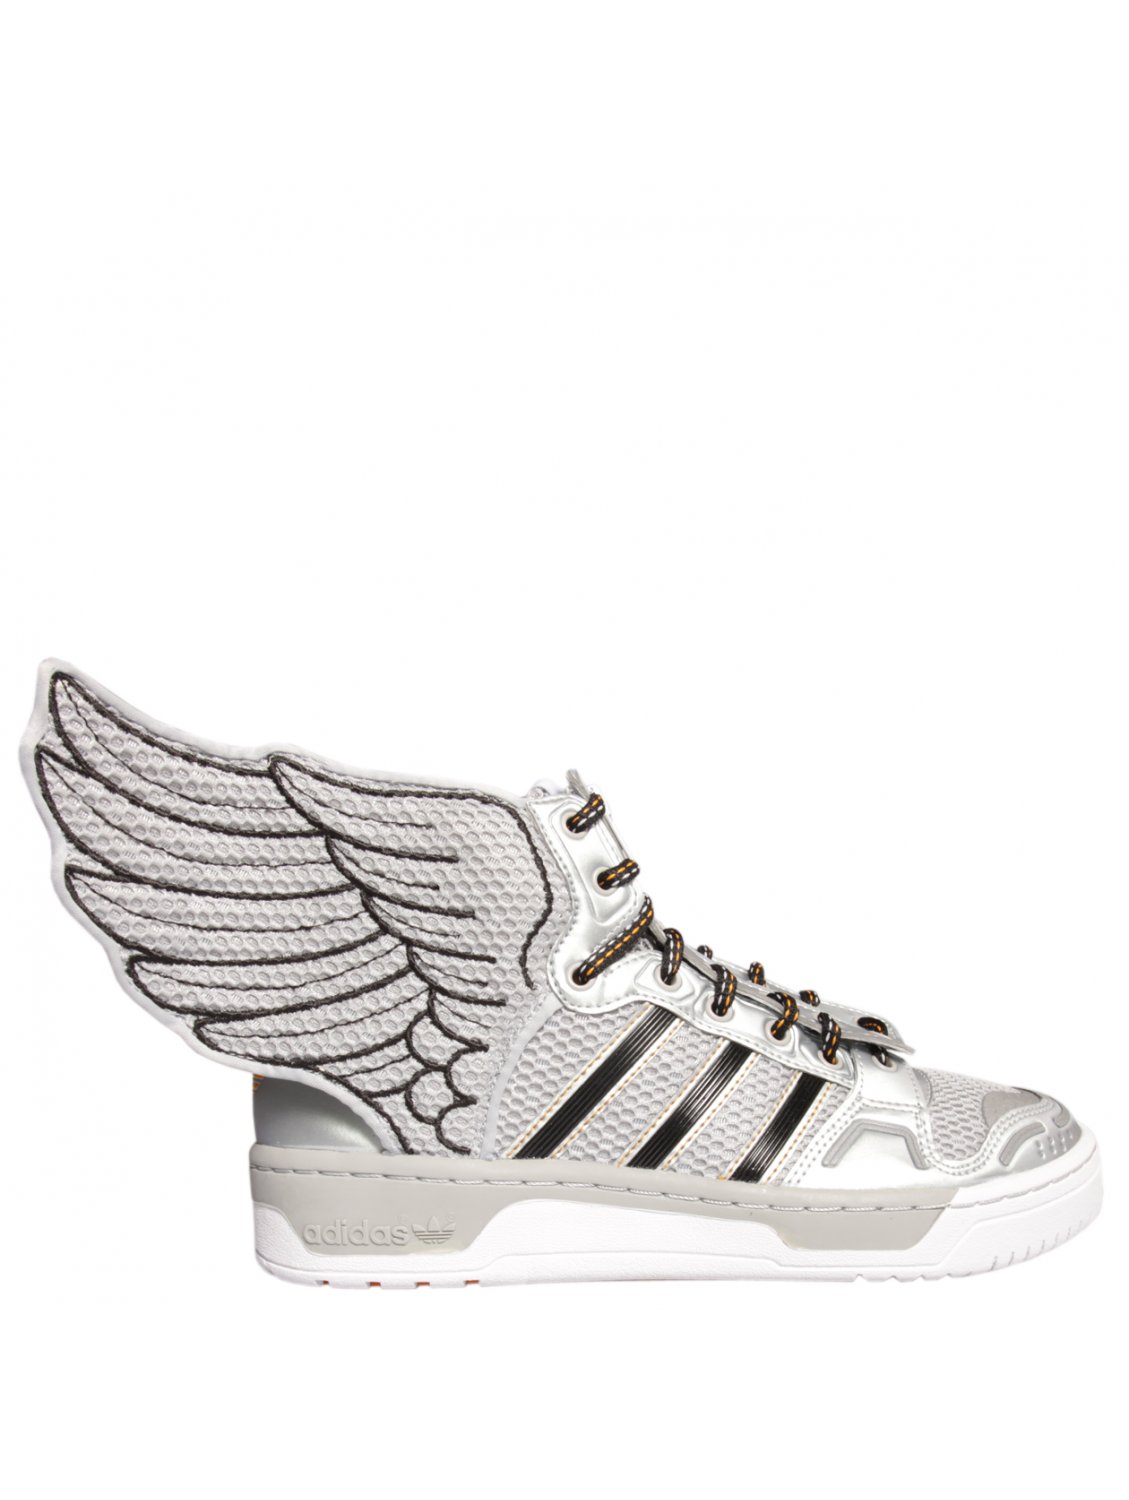 winged adidas high tops